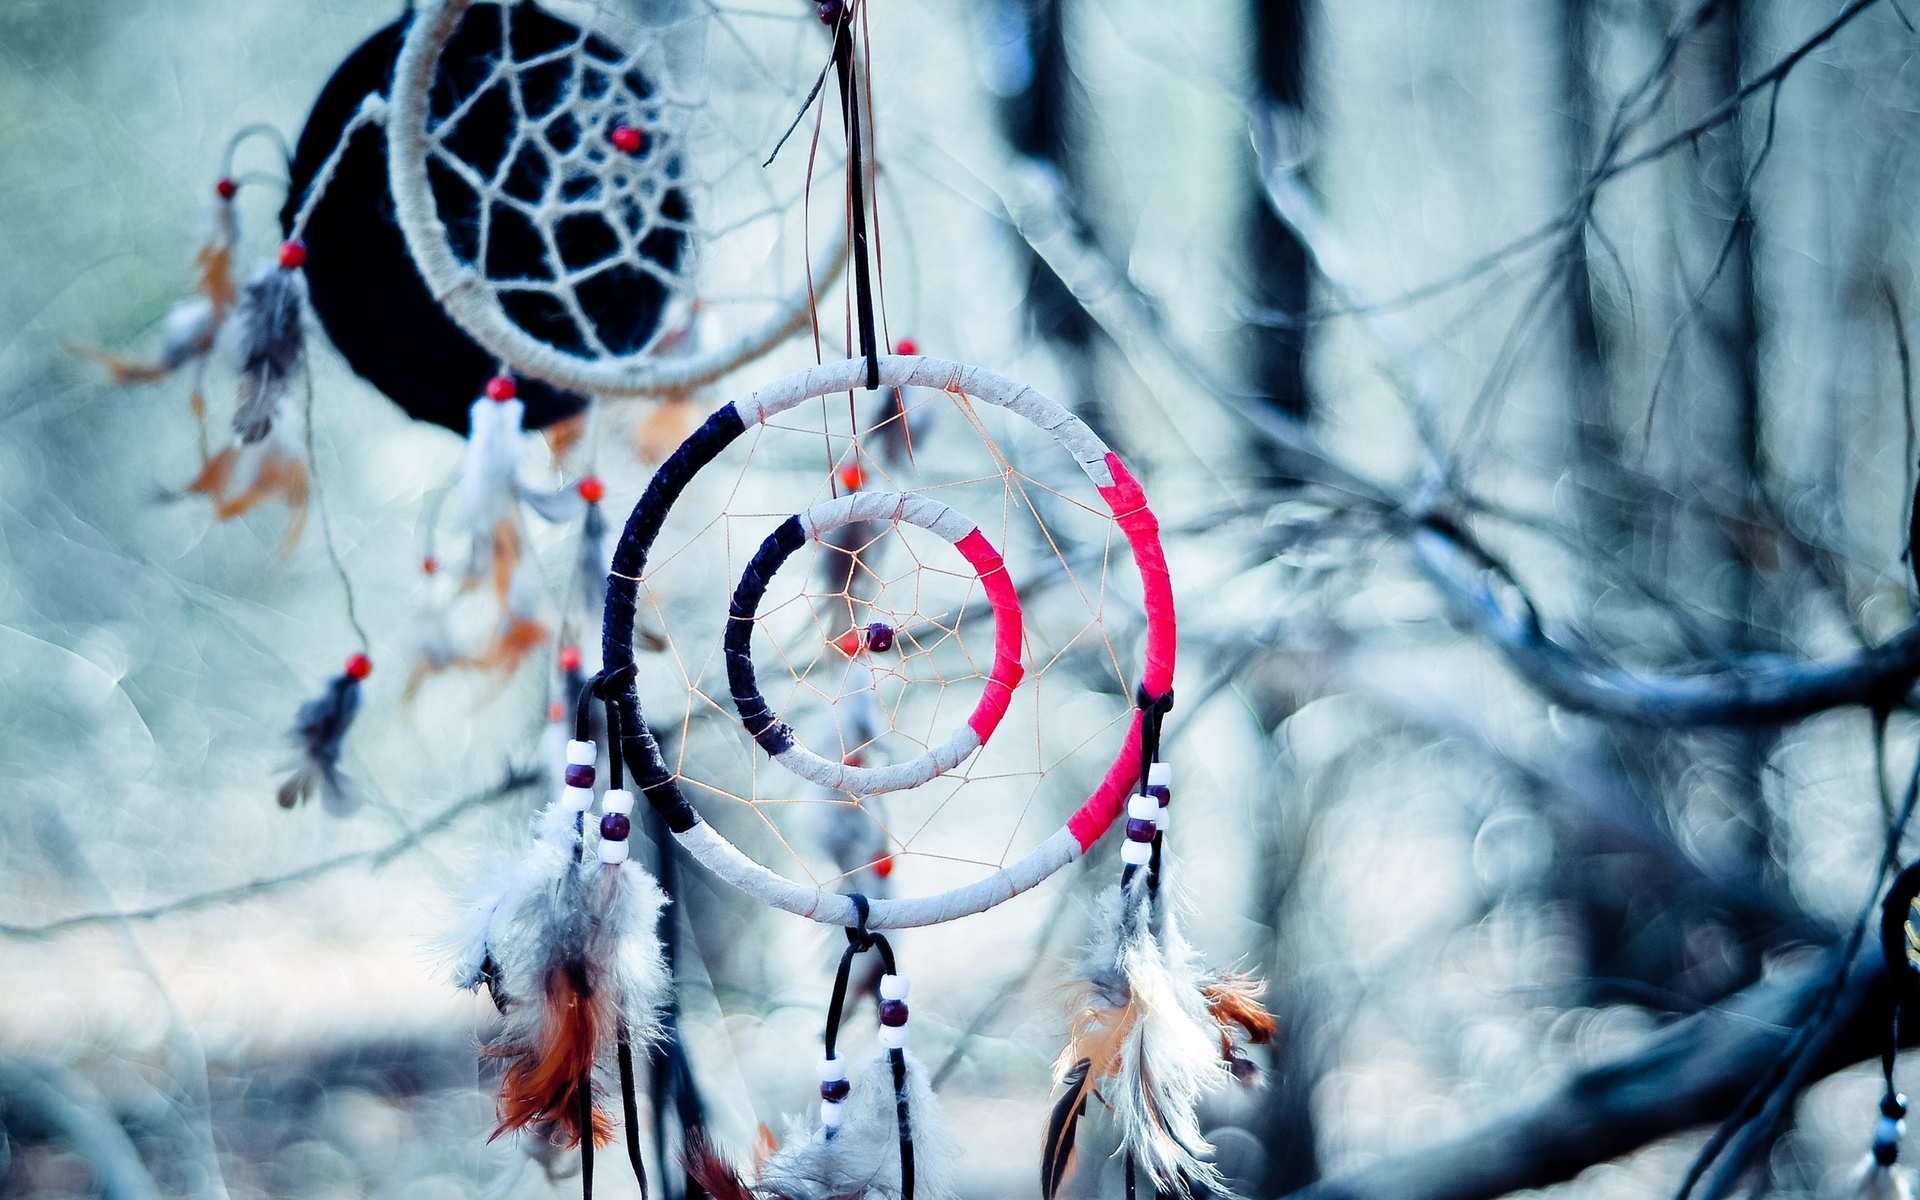 Latest collection of Hd Wallpapers Dream Catcher HD Backgrounds